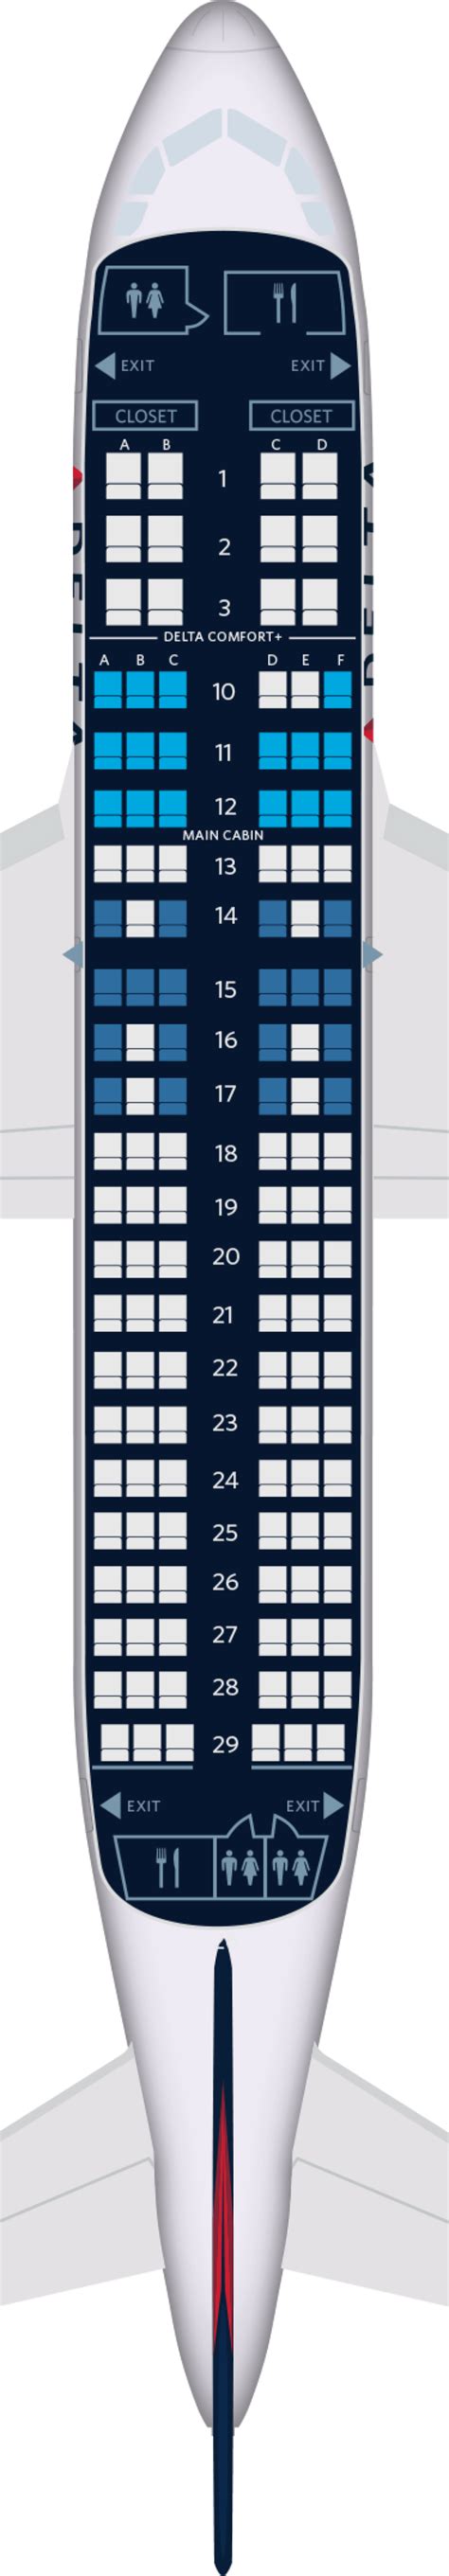 United Airlines Seating Chart Airbus A319 Awesome Home